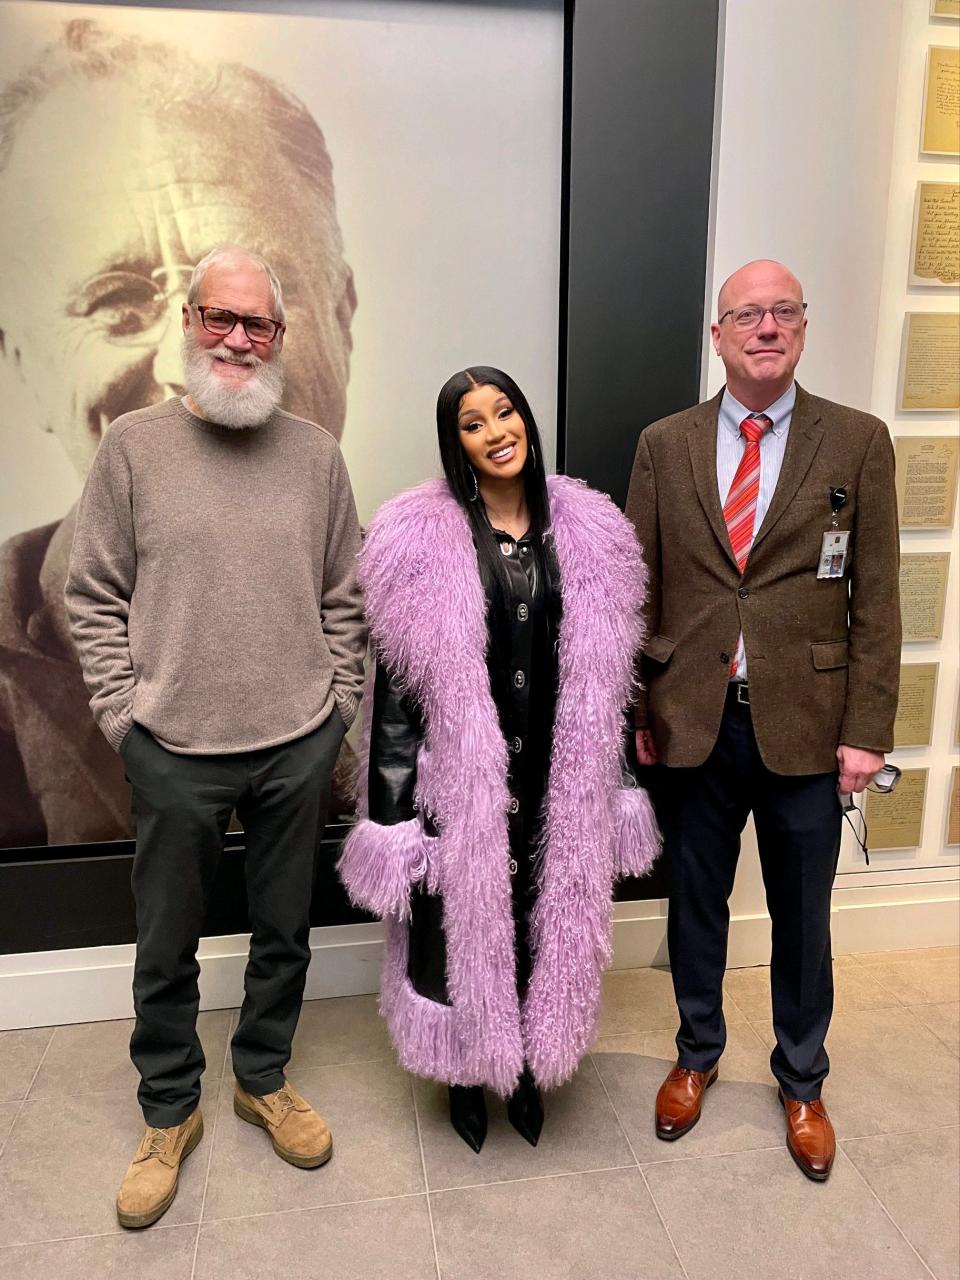 From left, David Letterman, Cardi B and Acting Director William Harris pose together at the Franklin D. Roosevelt Presidential Library and Museum in Hyde Park on Jan. 28.